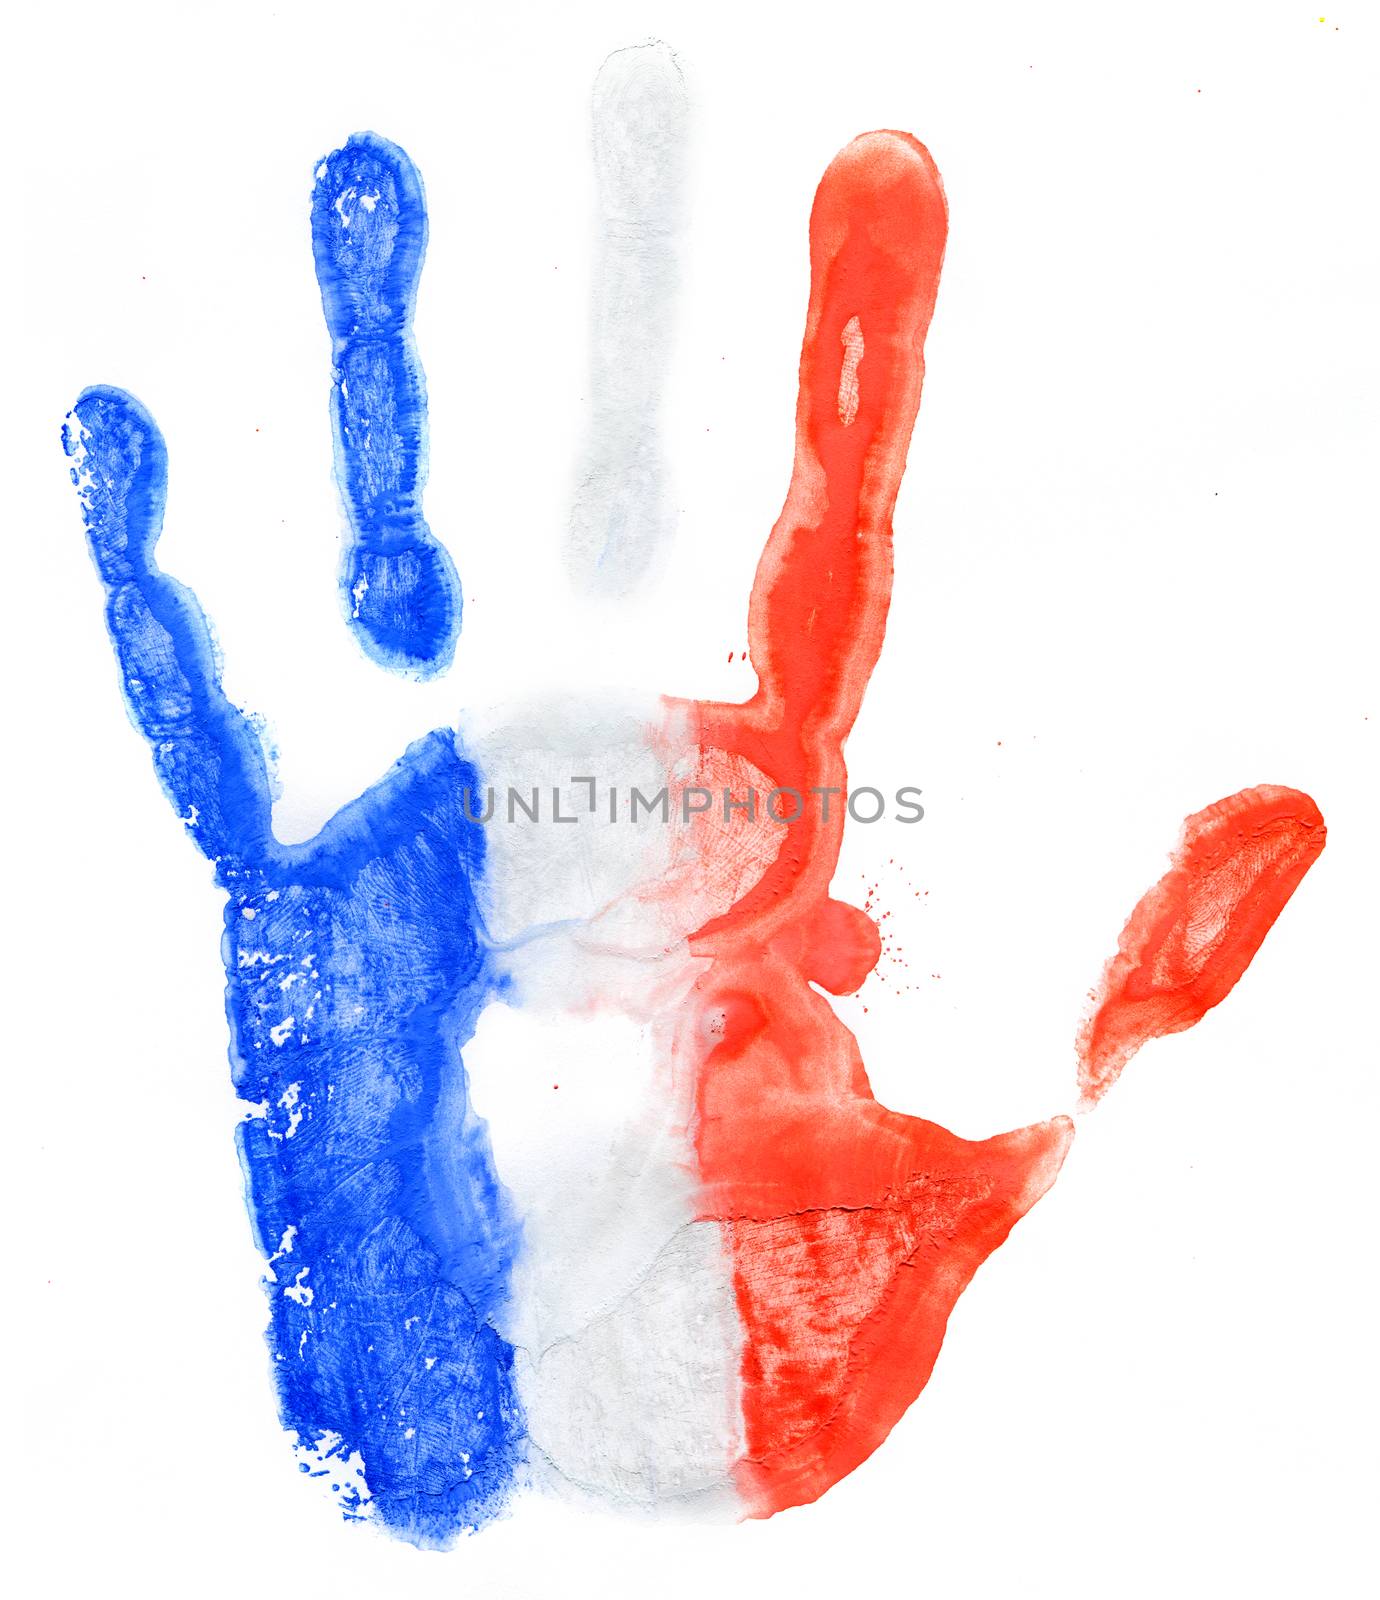 Handprint of a France flag on a white background